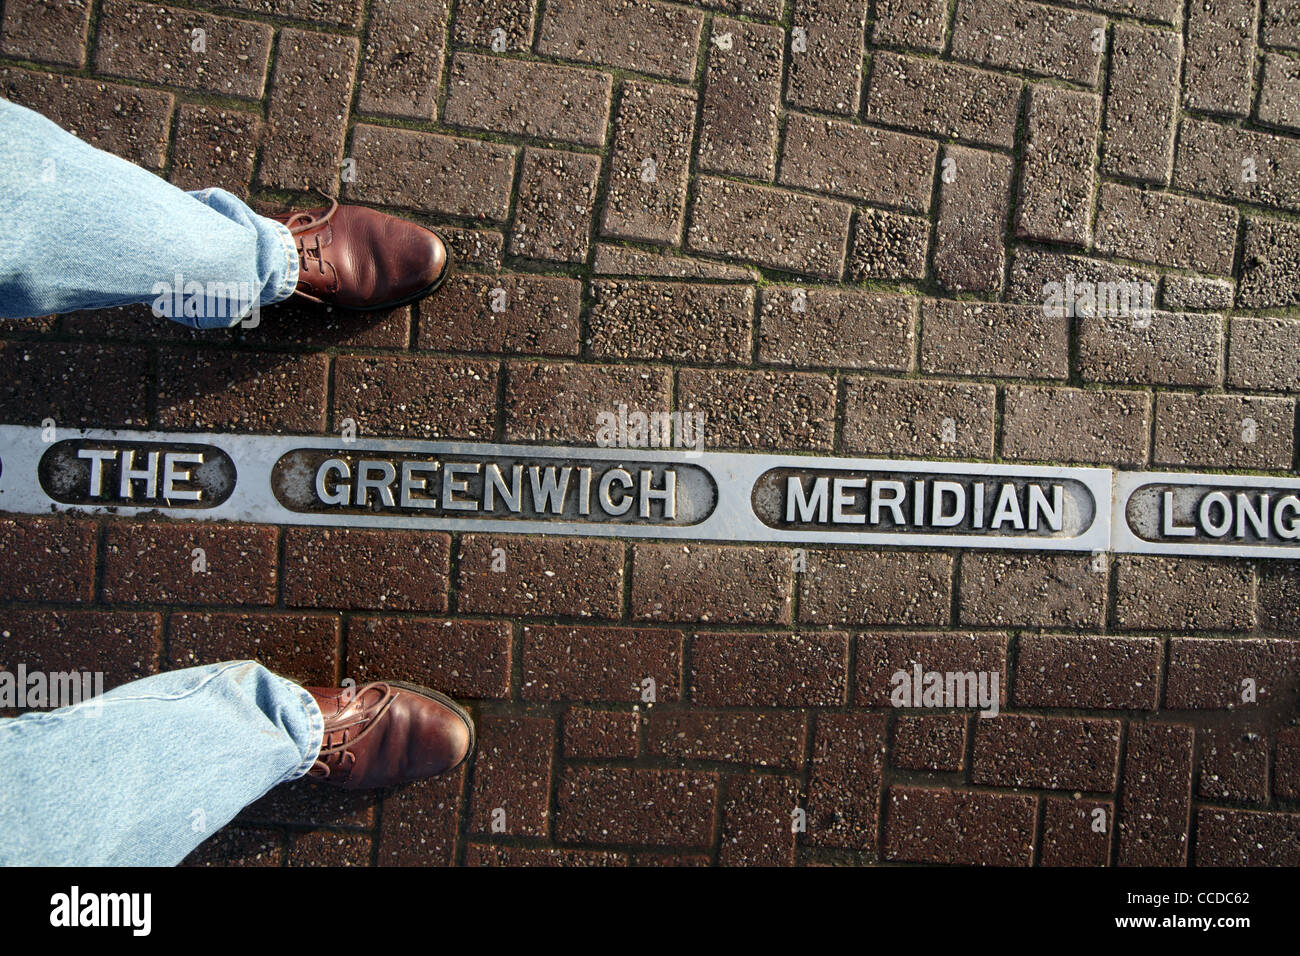 The line marking the Greenwich Meridian, Cleethorpes, Lincolnshire Stock Photo